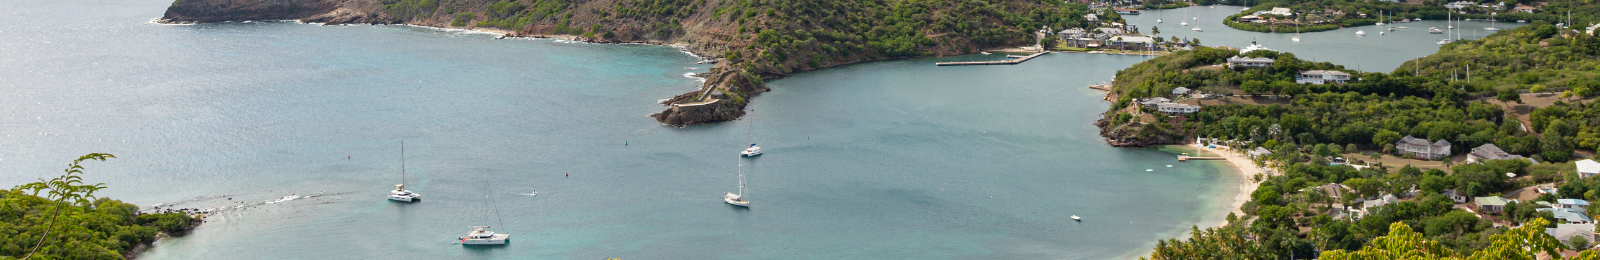 Exploring Antigua by Land and Sea